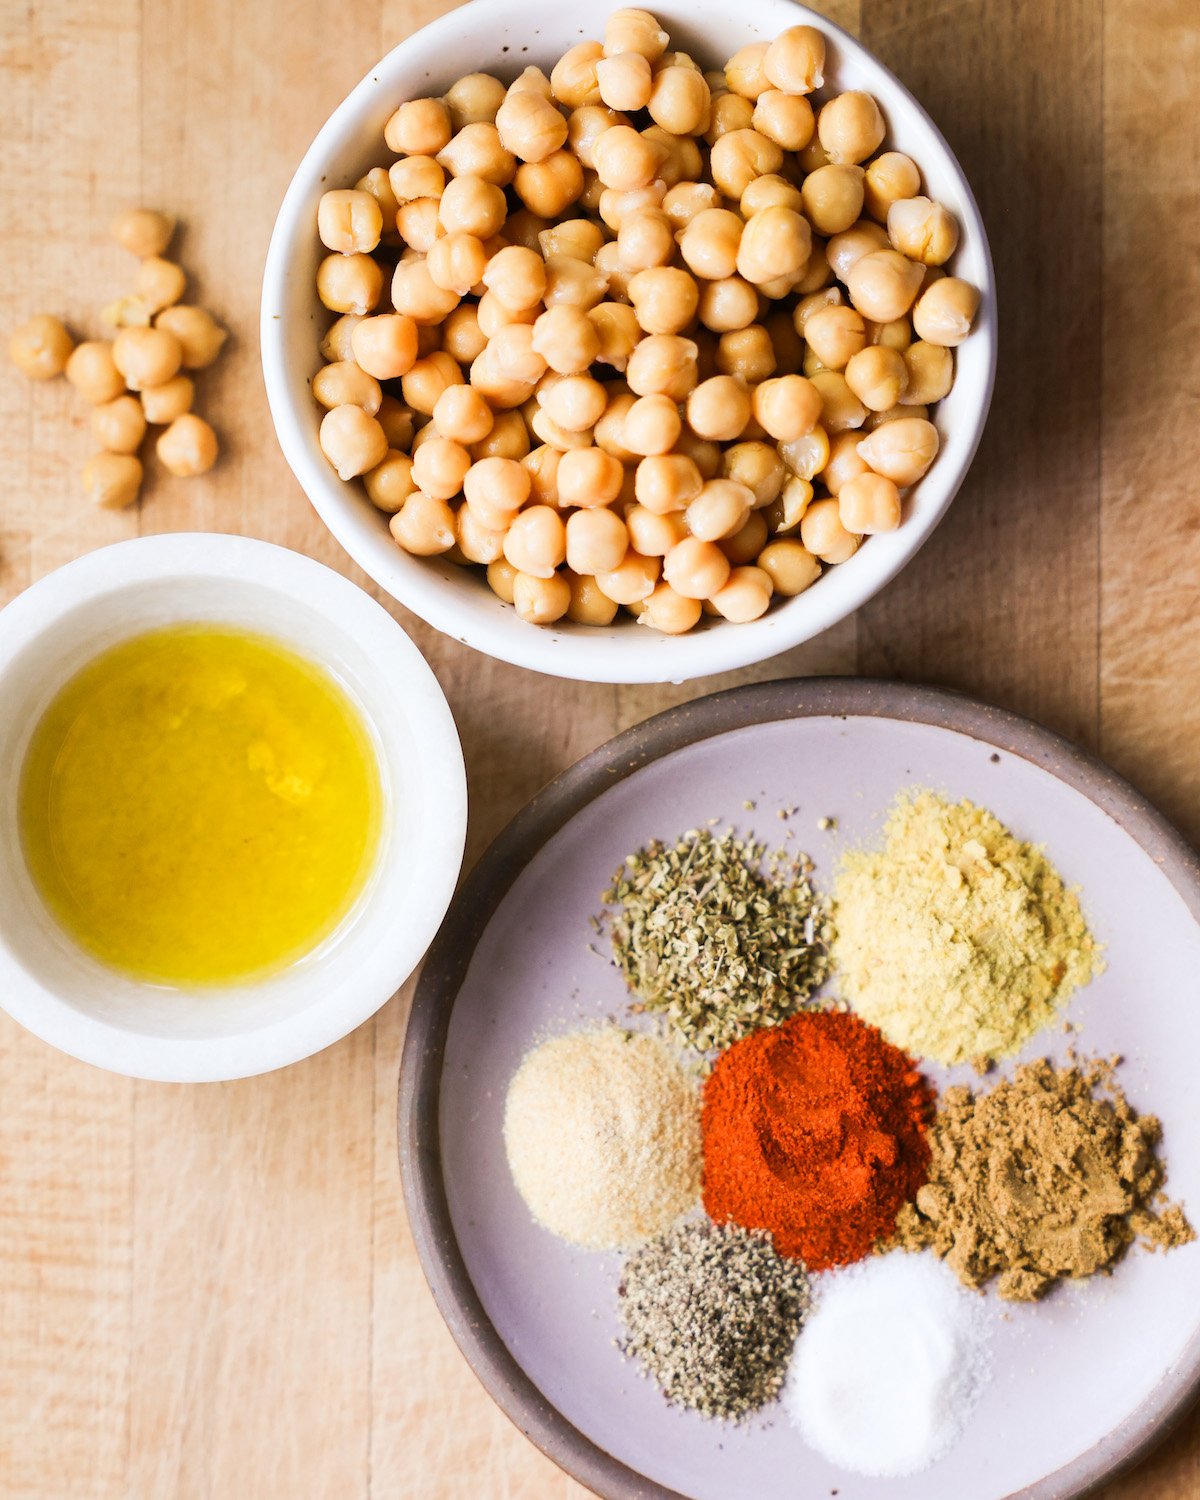 All of the ingredients for roasted chickpeas: canned chickpeas, olive oil, nutritional yeast, and spices.